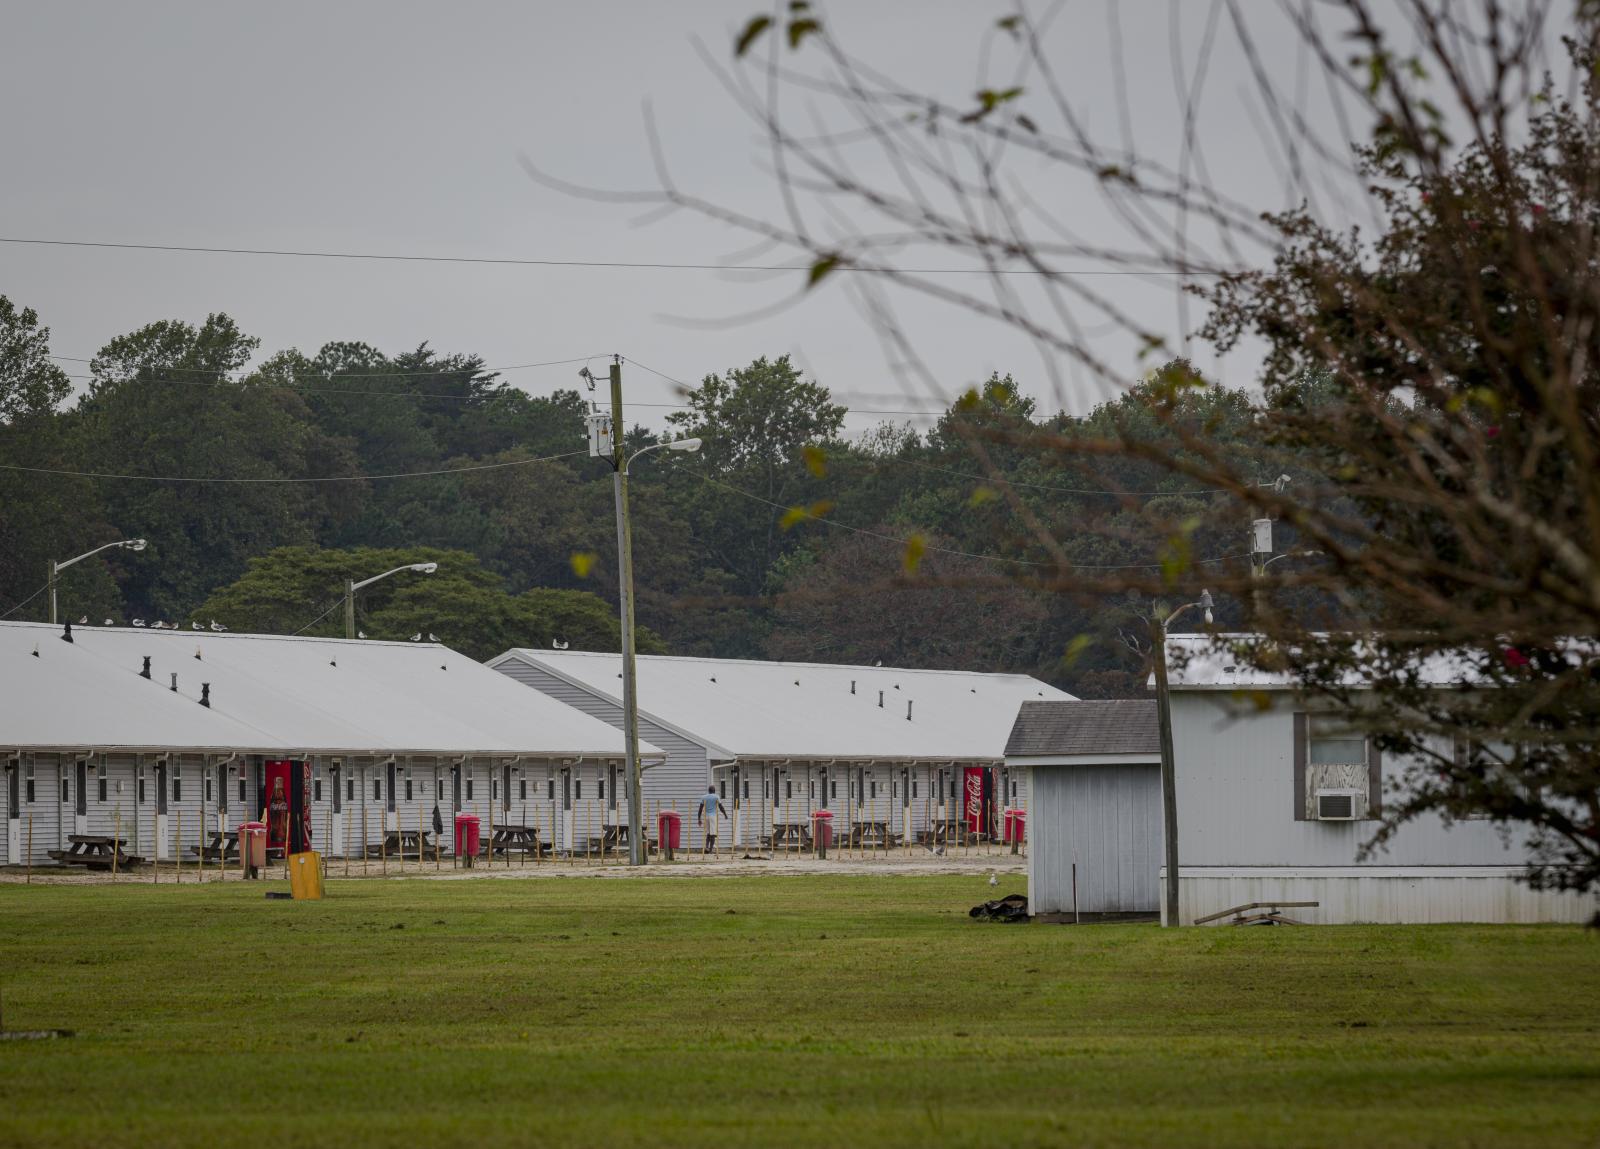 CHERITON, VA - September 26, 2020: Barracks where agriculture workers stay during each season....